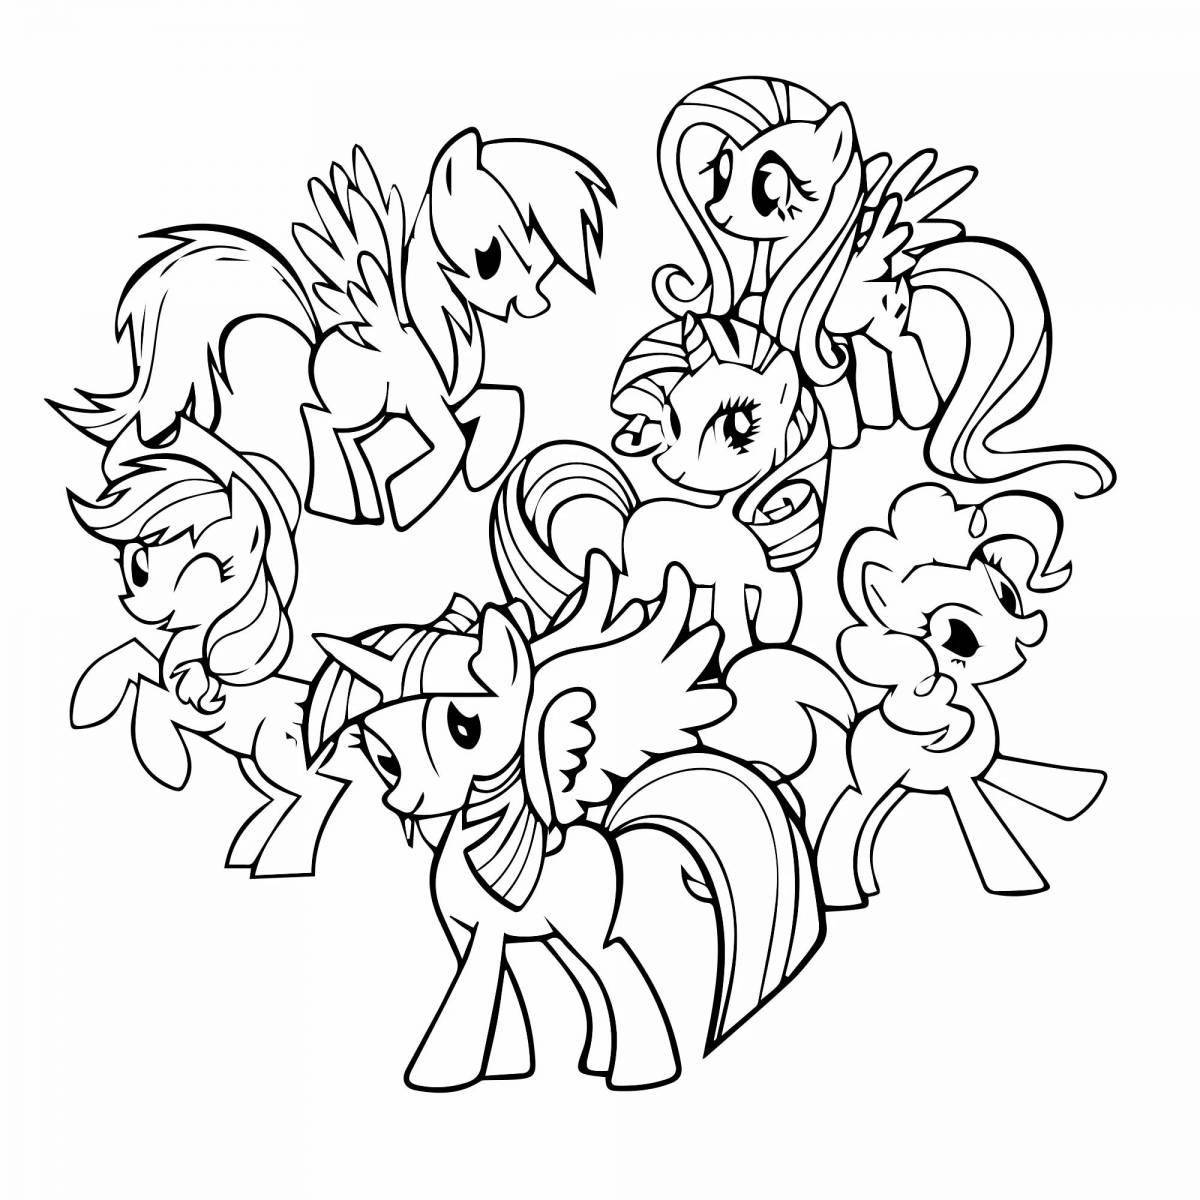 A wonderful pony coloring book for 3-4 year olds